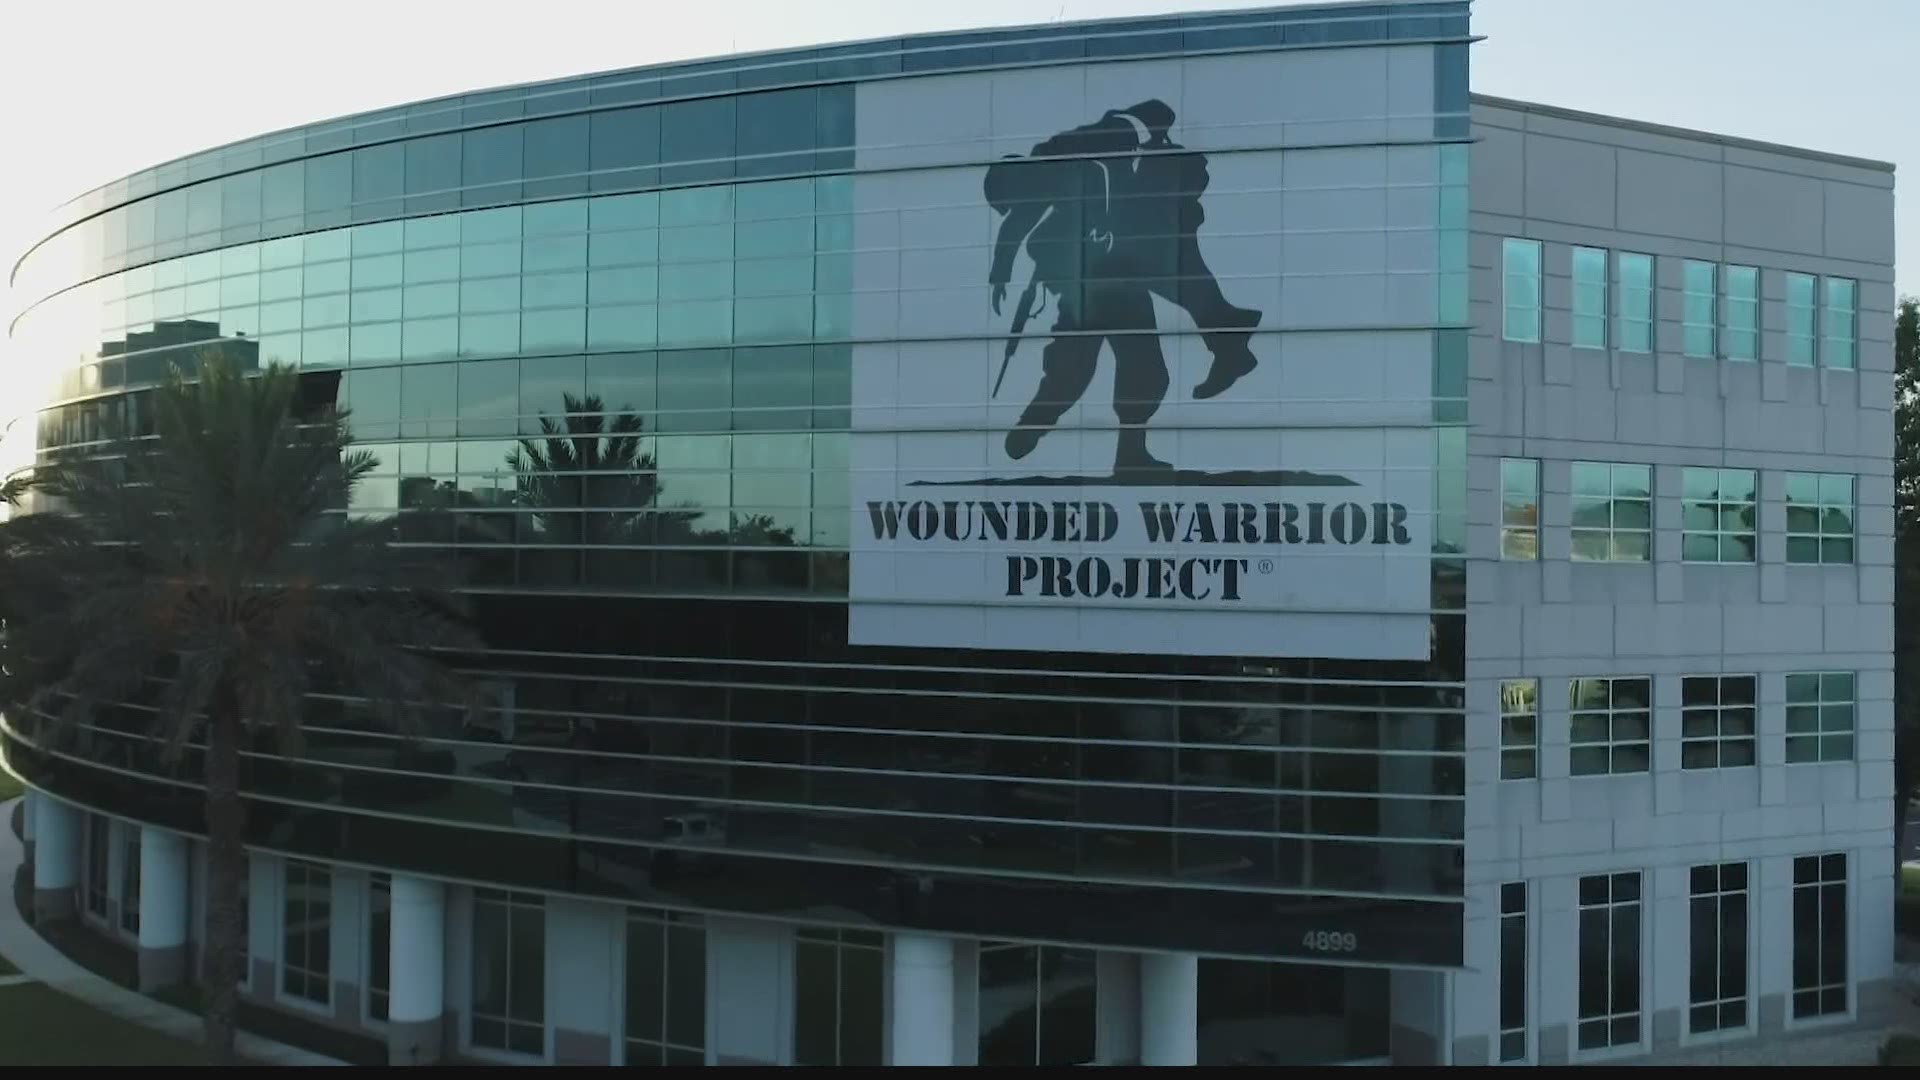 The "Warriors to Work" program helps post-9/11 wounded veterans and their family members land employment year-round.